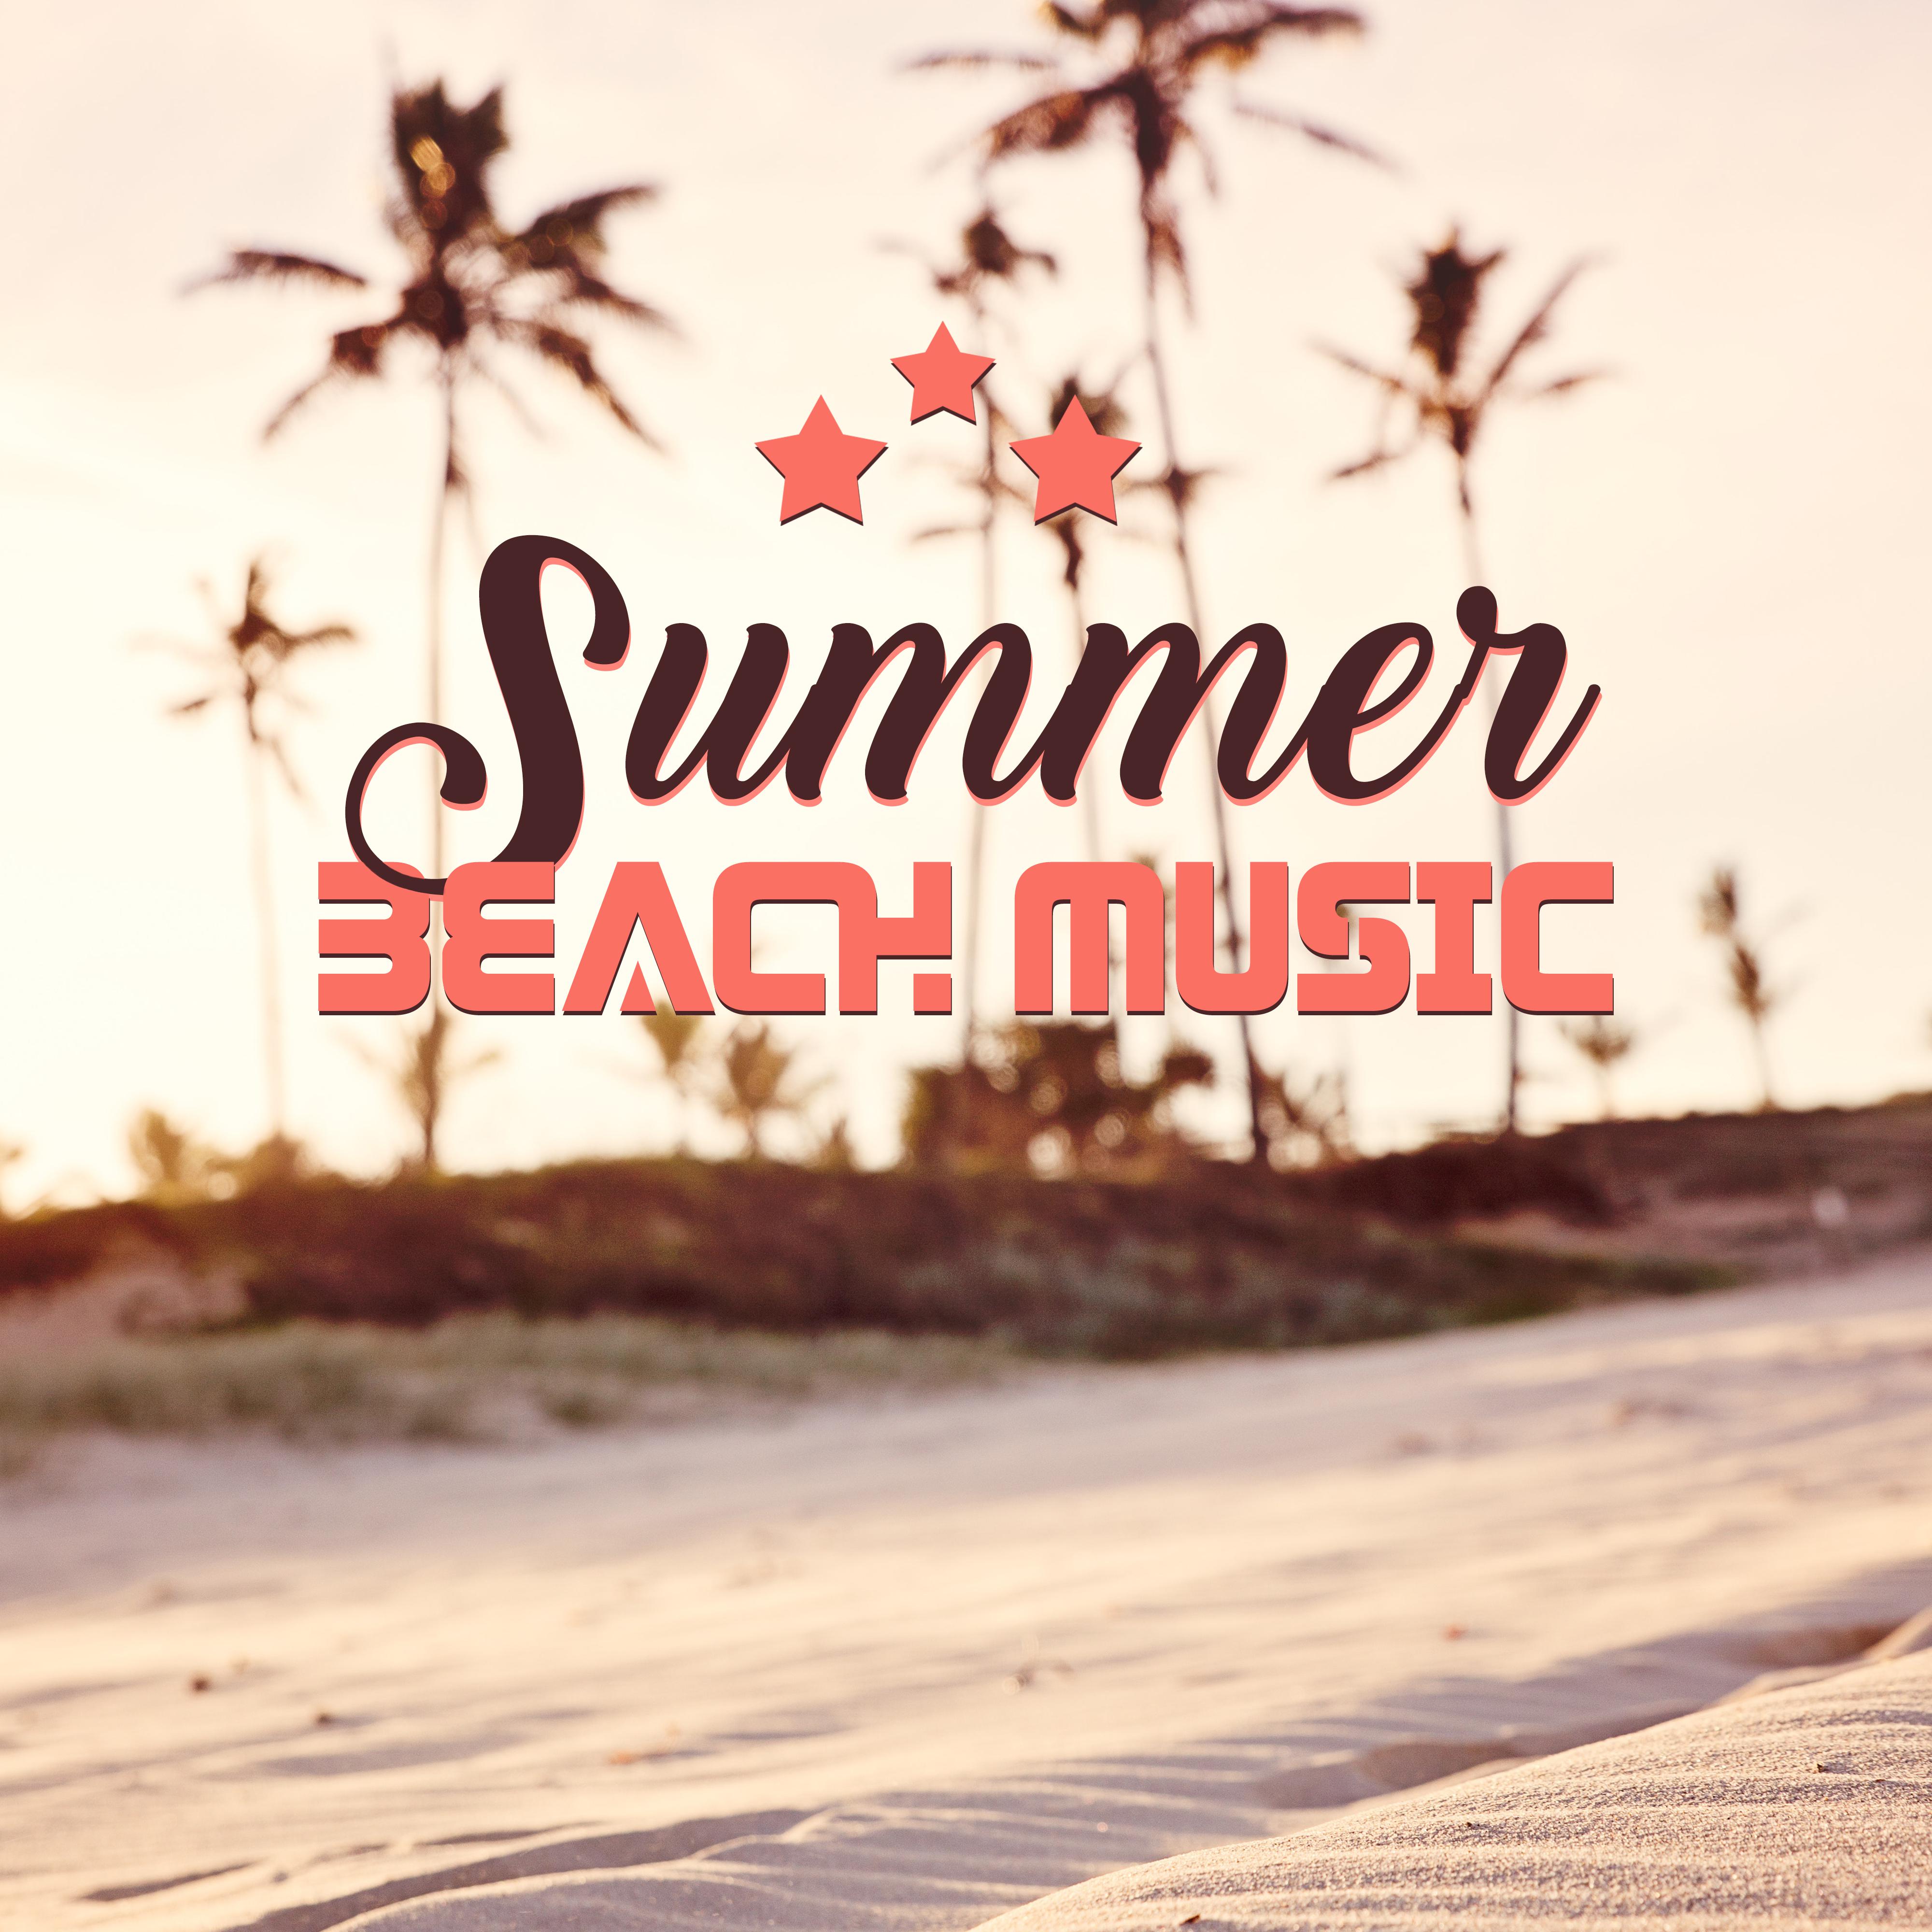 Summer Beach Music: Ibiza Chill Out, Relax, Music Zone, Relaxing Summer Lounge, Ambient Music, Chill Out 2019